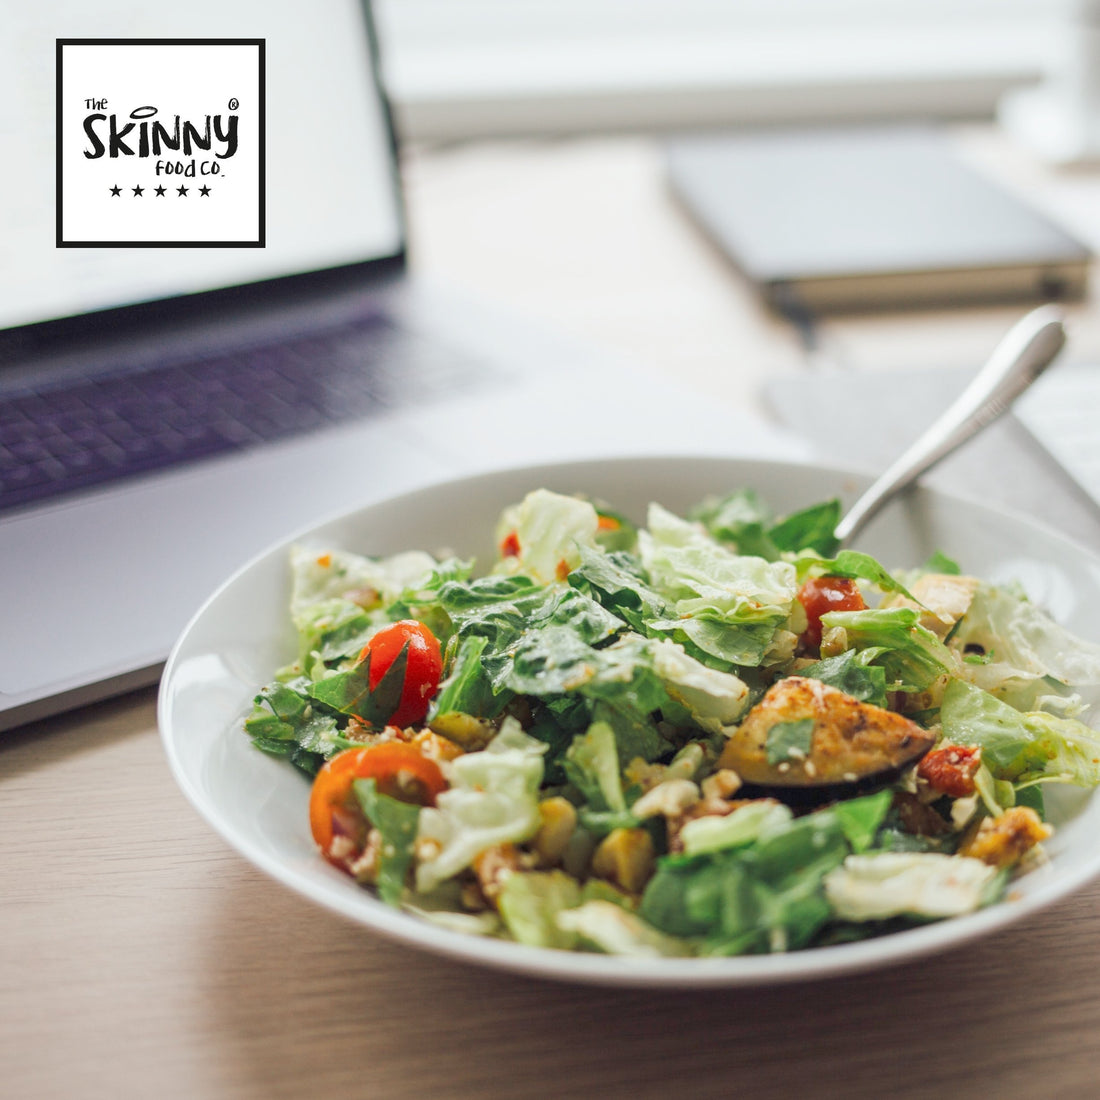 How To Eat Healthier At Work - theskinnyfoodco